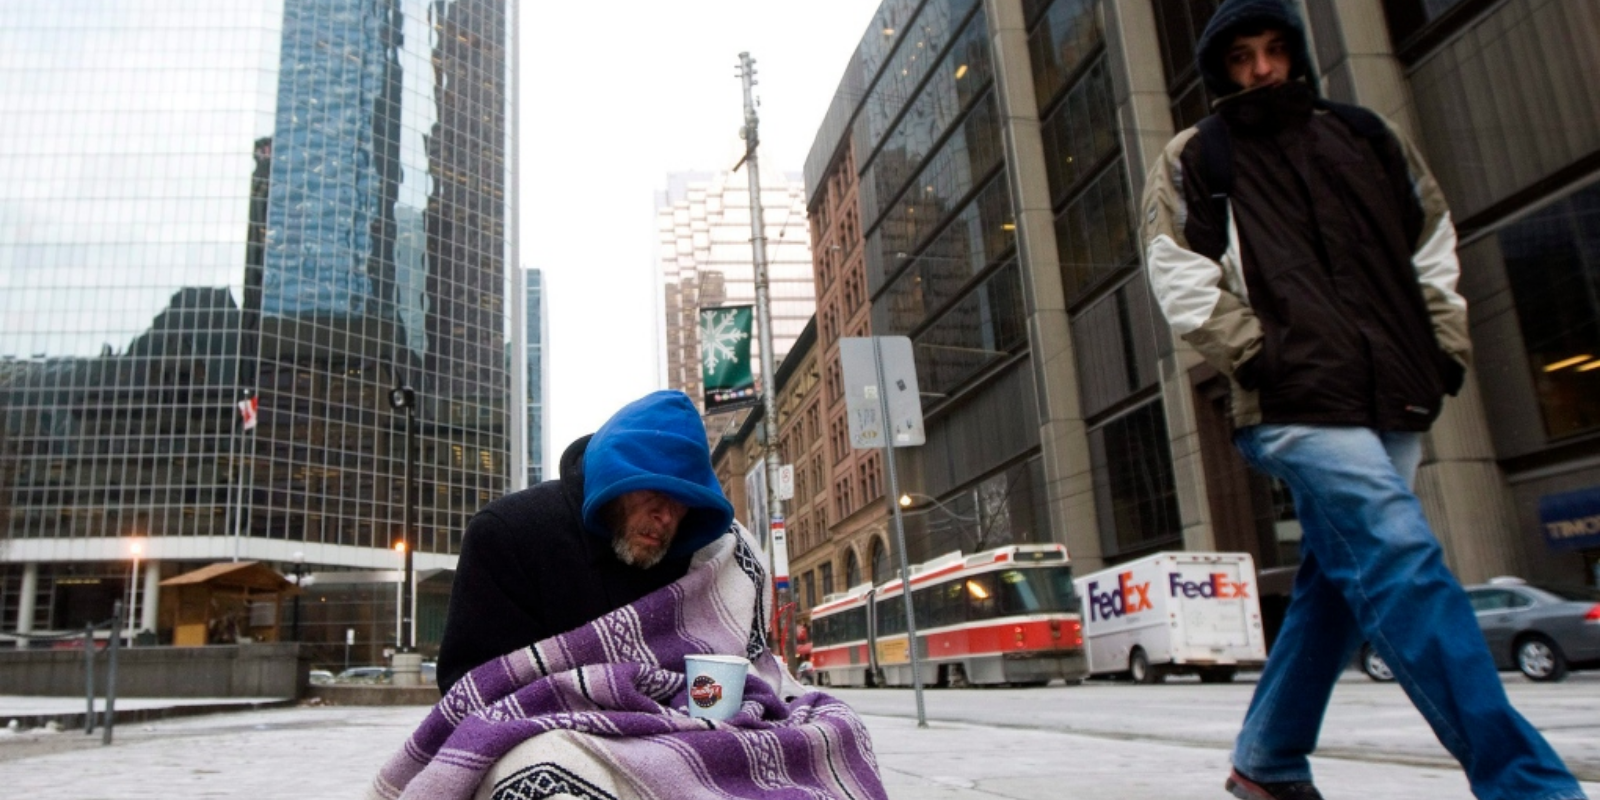 One in three Canadians say they won't recover from financial crisis